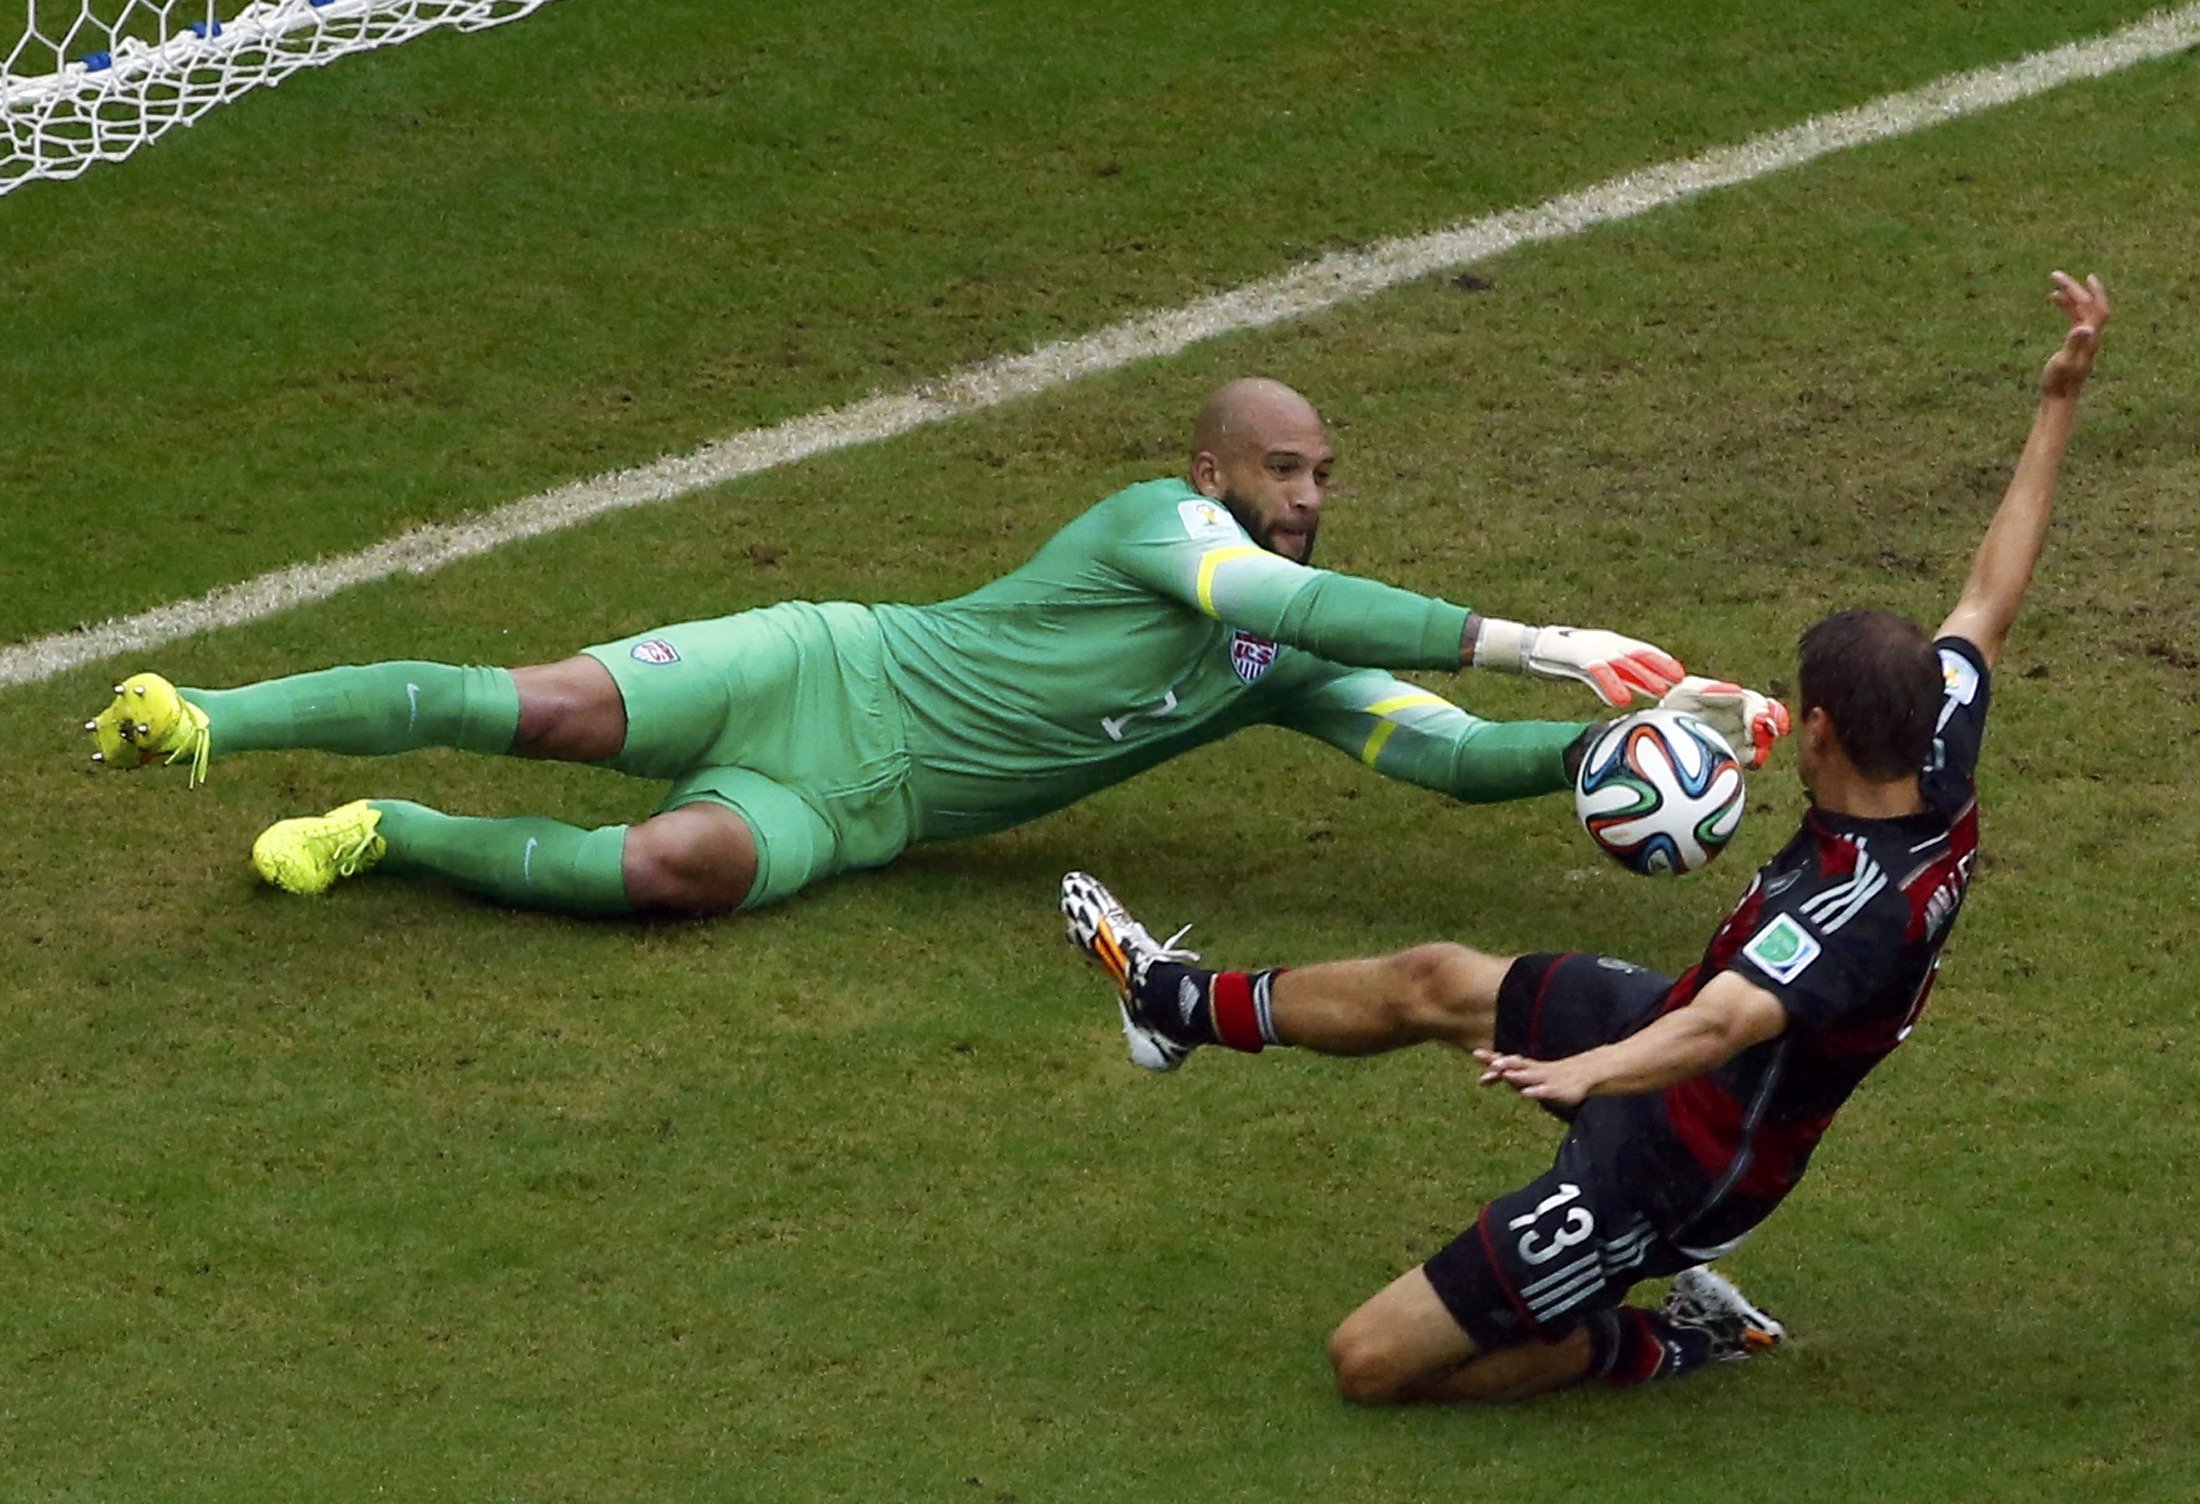 Germany's Thomas Mueller challenges goalkeeper Tim Howard of the U.S. during their 2014 World Cup Group G soccer match at the Pernambuco arena in Recife, Brazil on June 26, 2014.